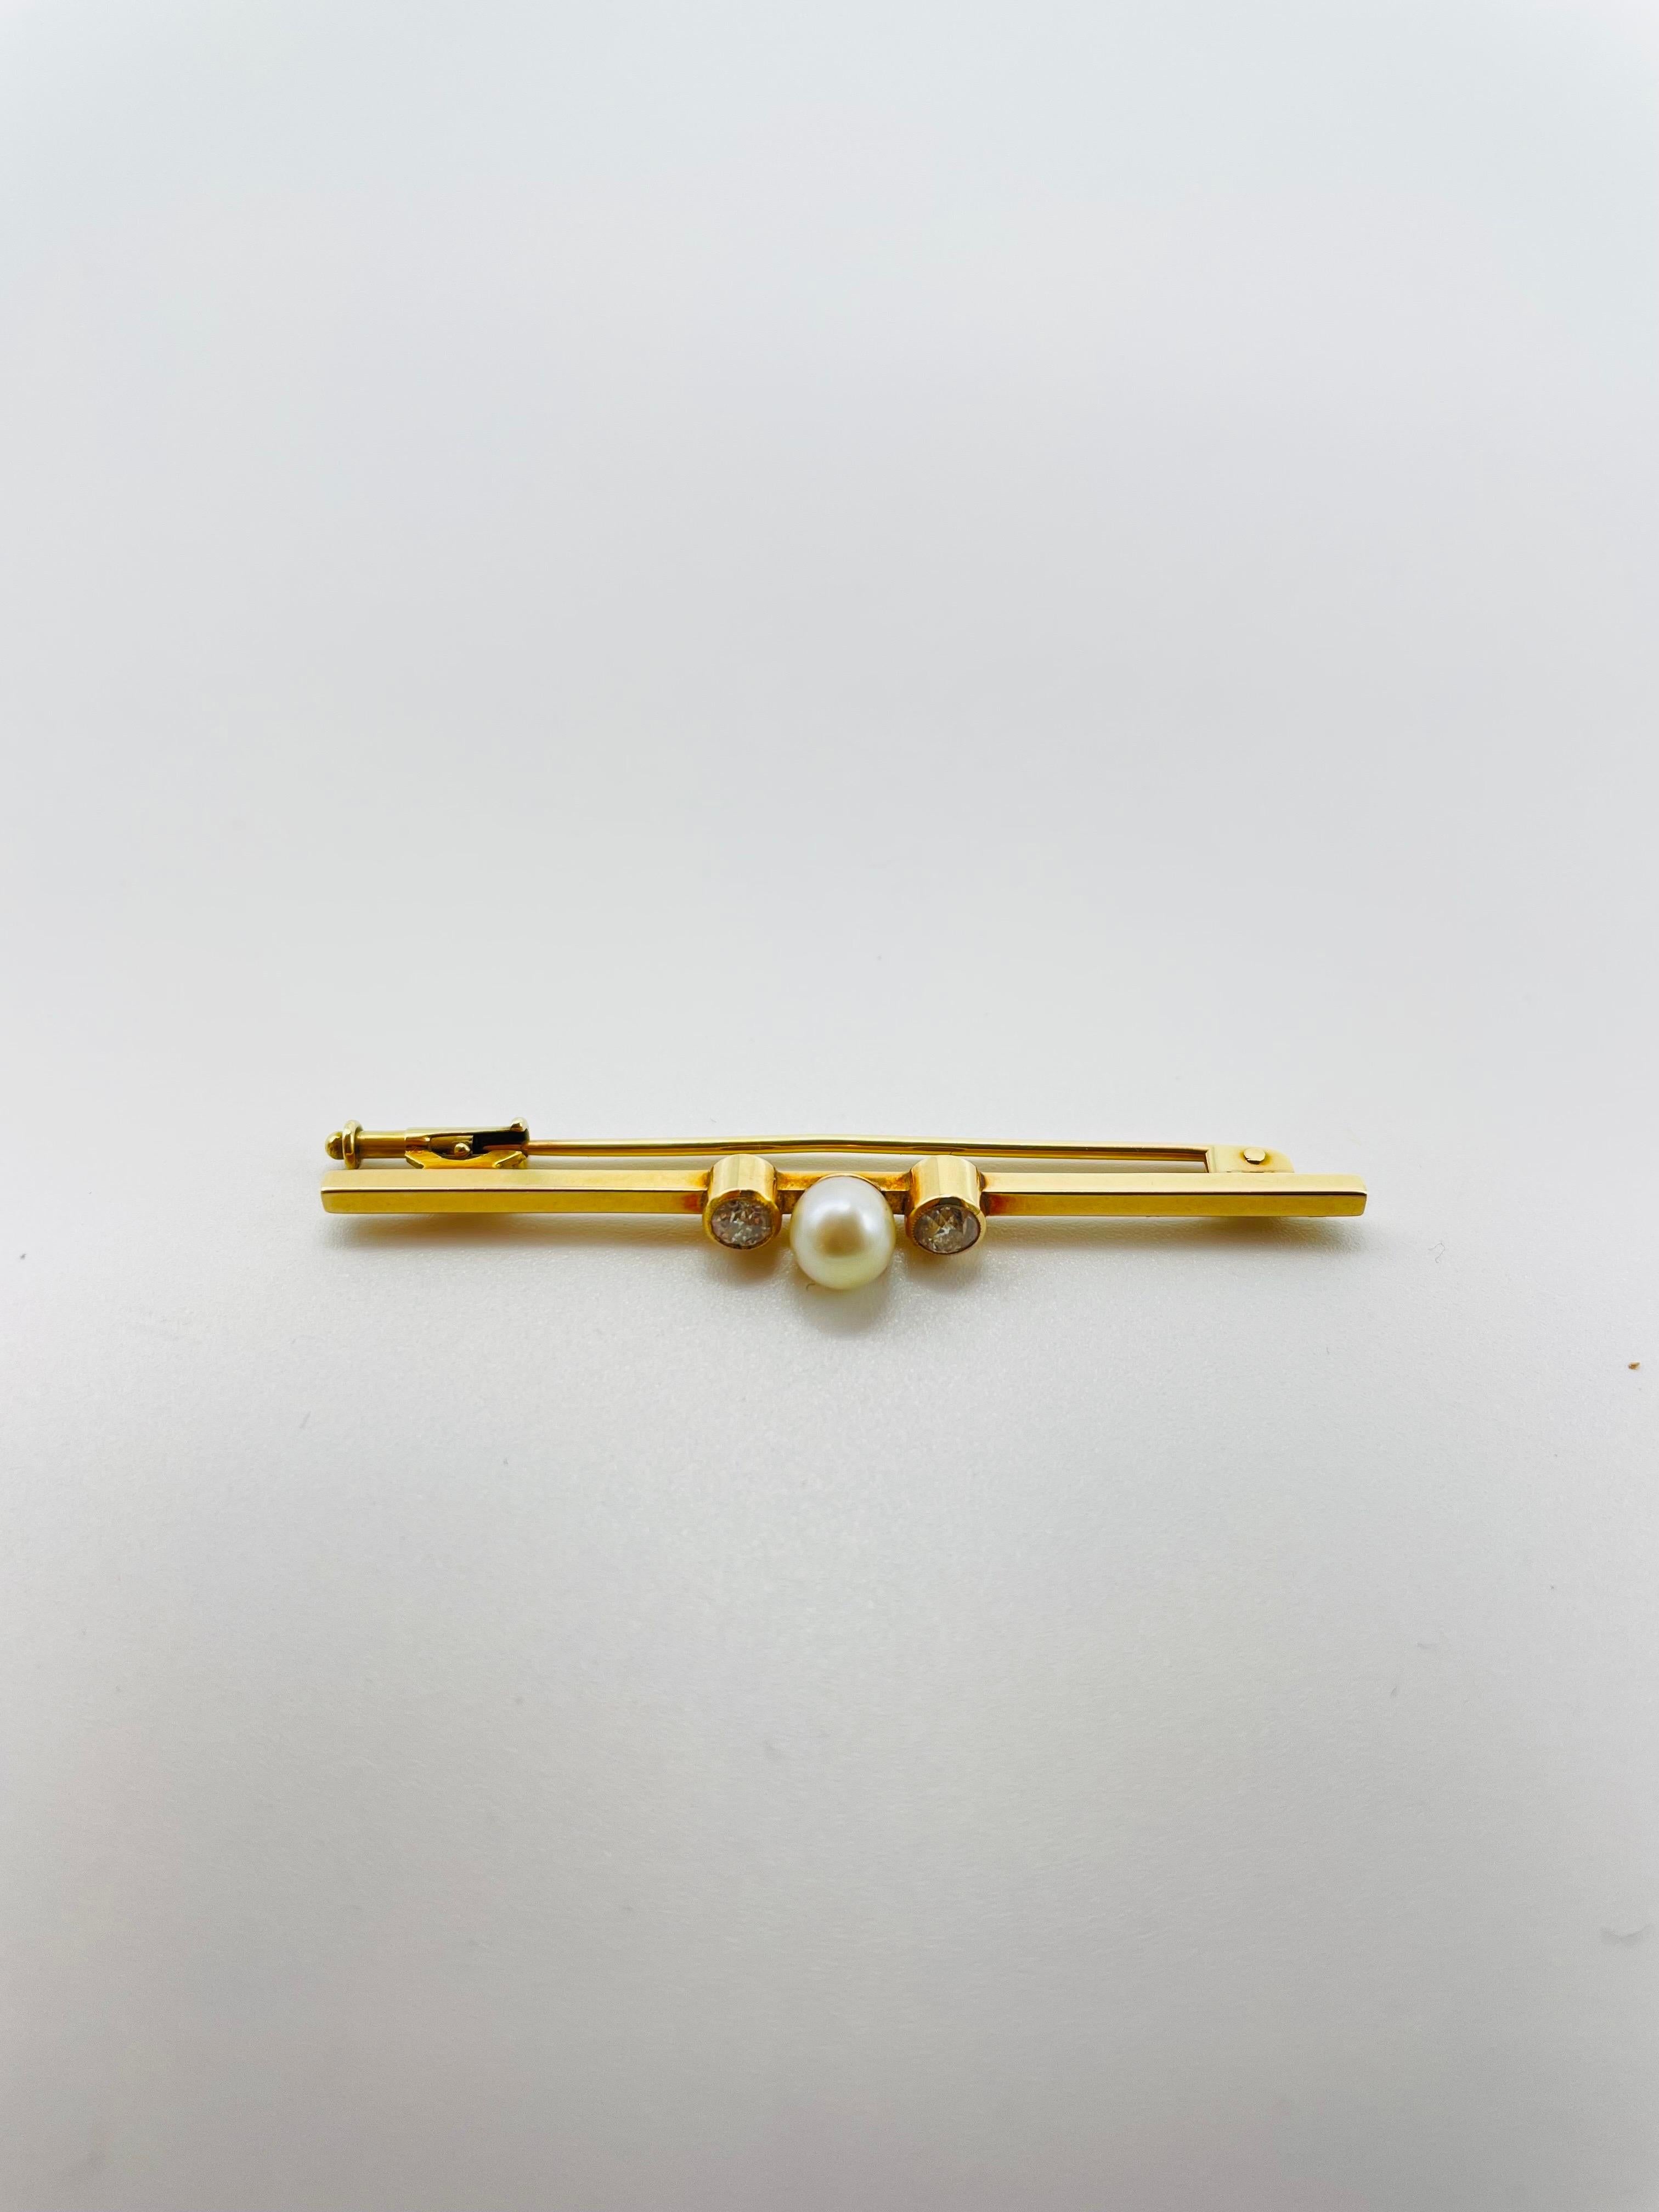 Antique 14k gold bar brooch with diamonds and pearl For Sale 1